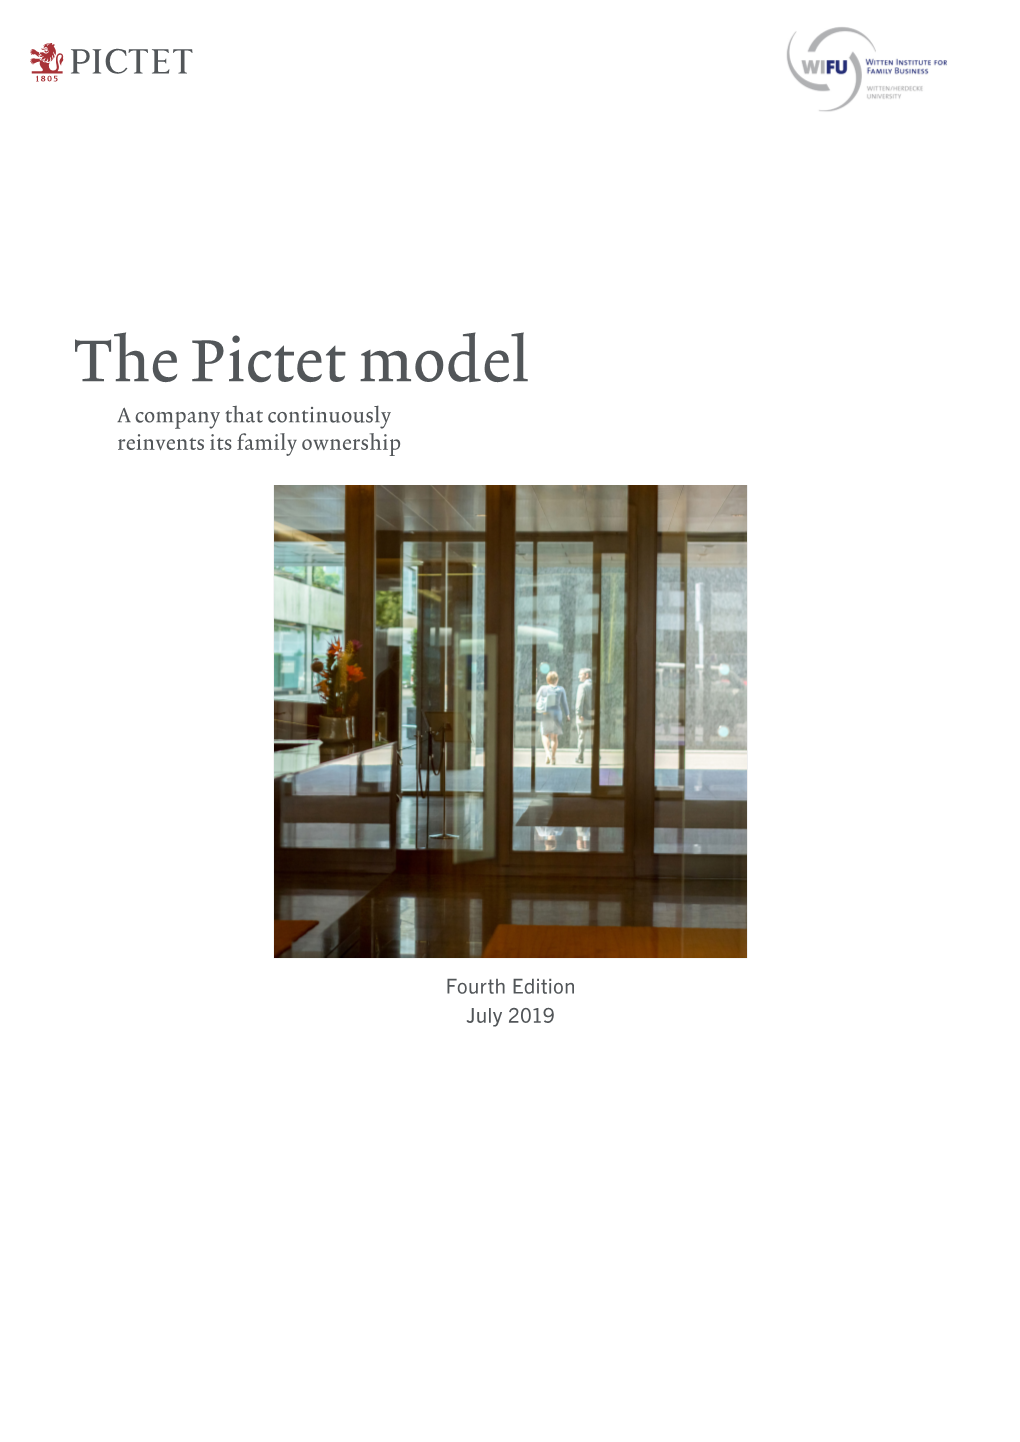 The Pictet Model a Company That Continuously Reinvents Its Family Ownership